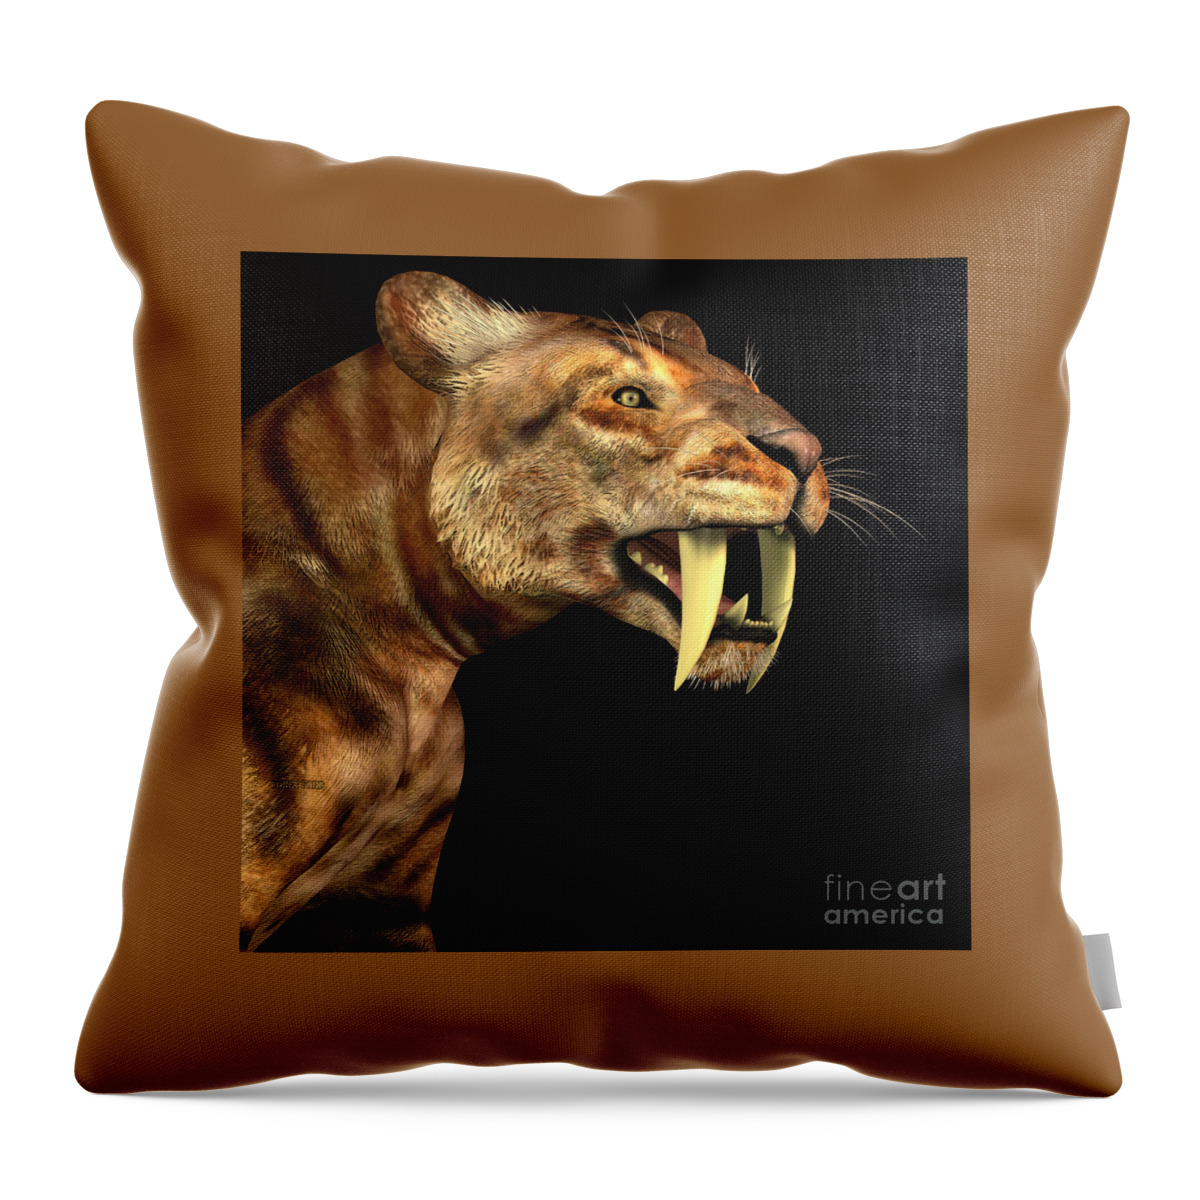 Saber-toothed Tiger Throw Pillow featuring the painting Saber-tooth Cat on Black by Corey Ford